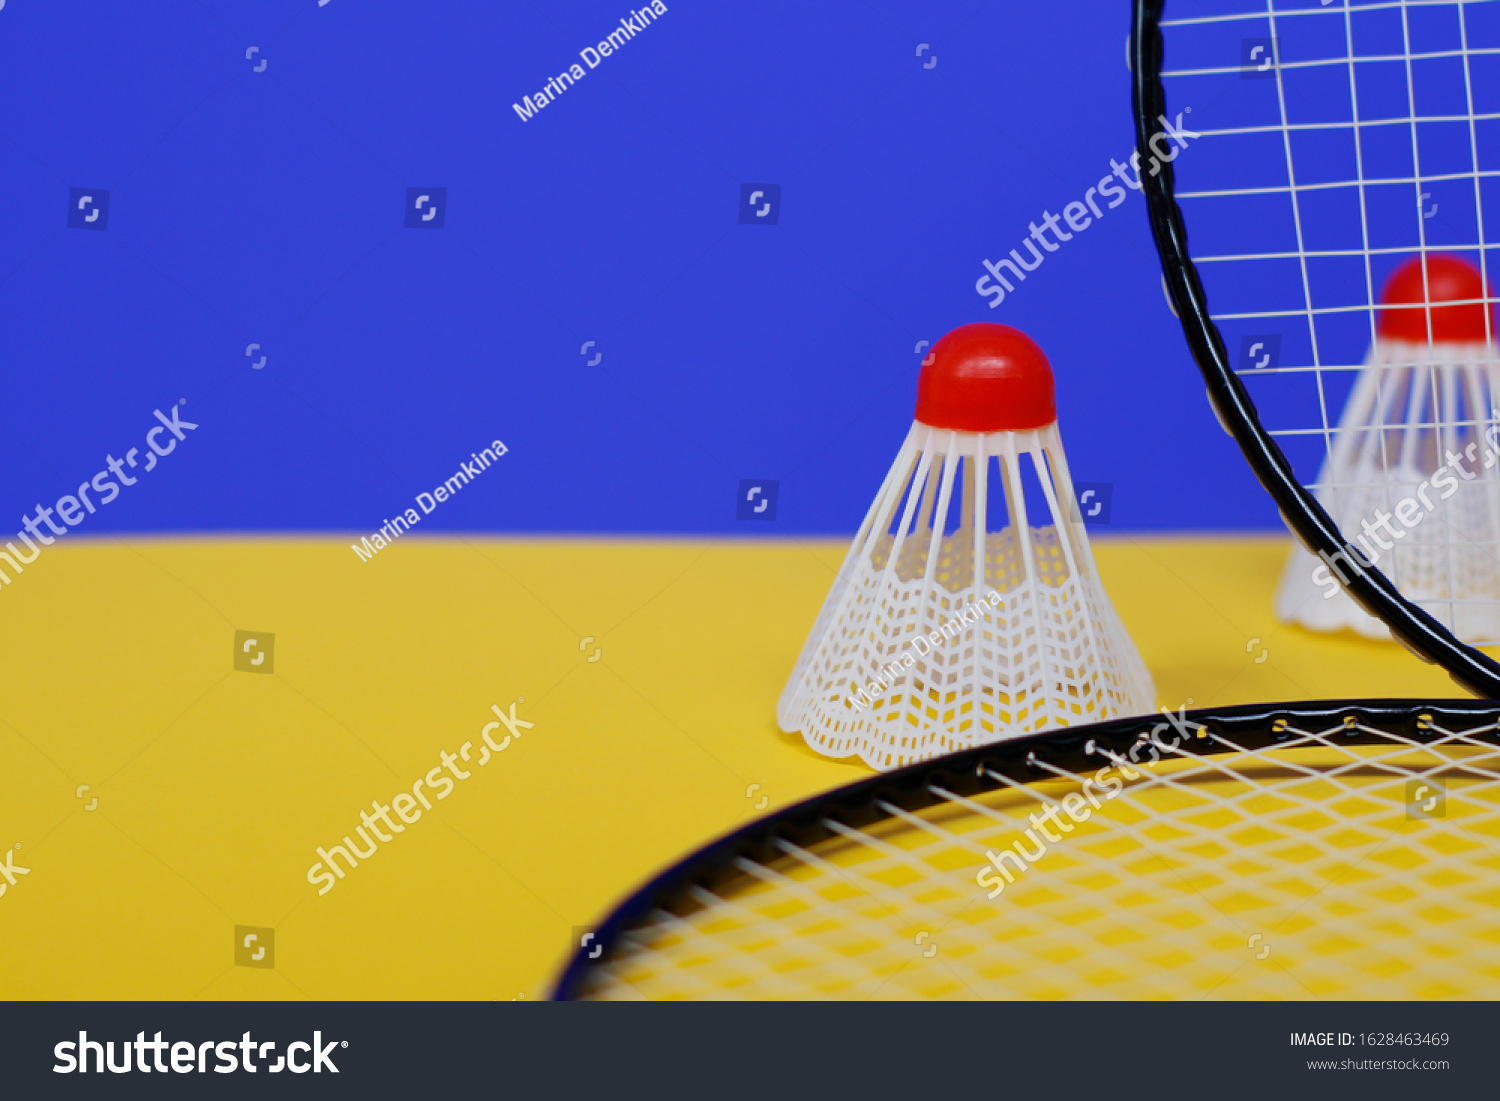 Badminton. Two shuttlecocks and two badminton racket. The colored background is blue and yellow. Idea for a magazine. #1628463469